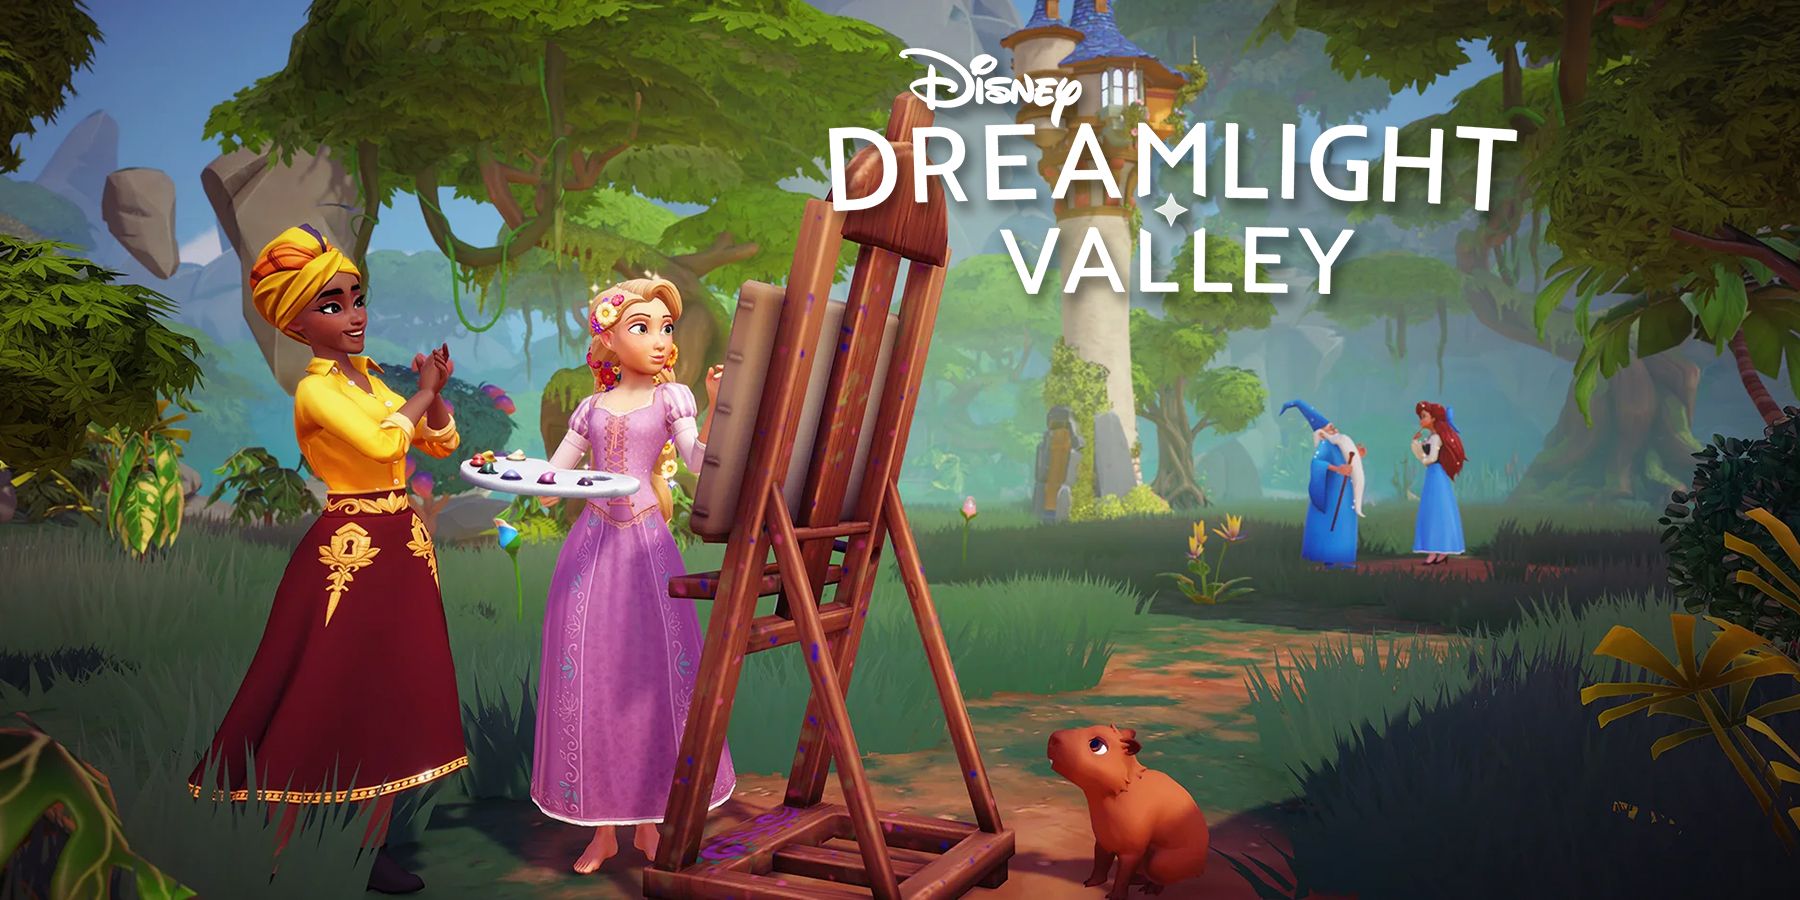 Disney Dreamlight Valley ditches free-to-play release plan